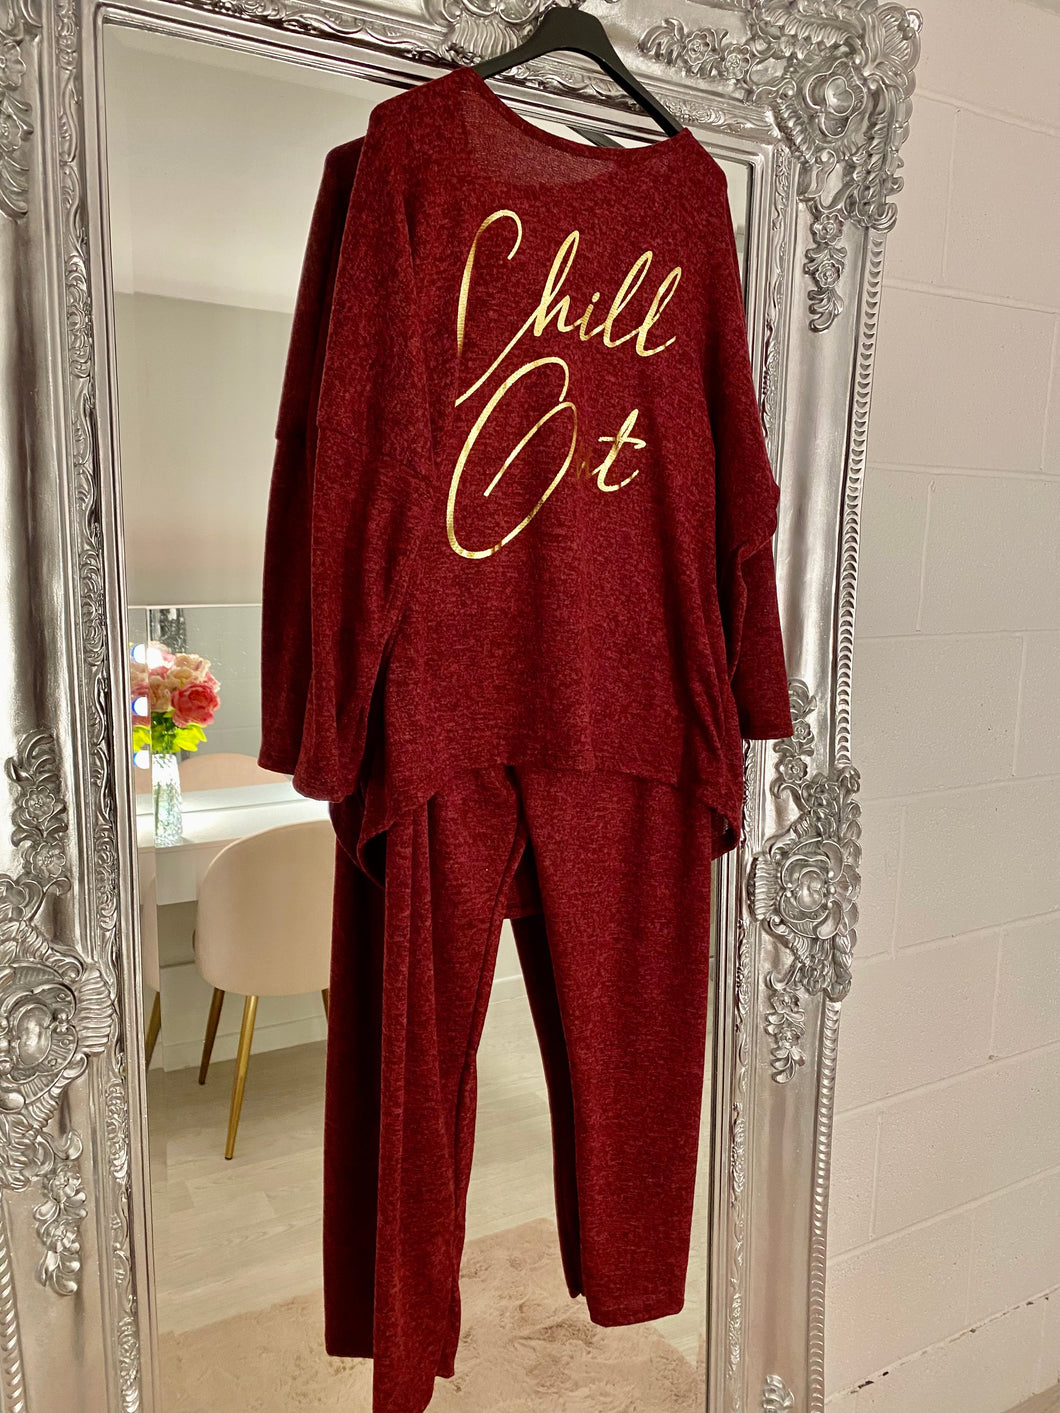 Chill Out Lounge Wear - 8 Colours